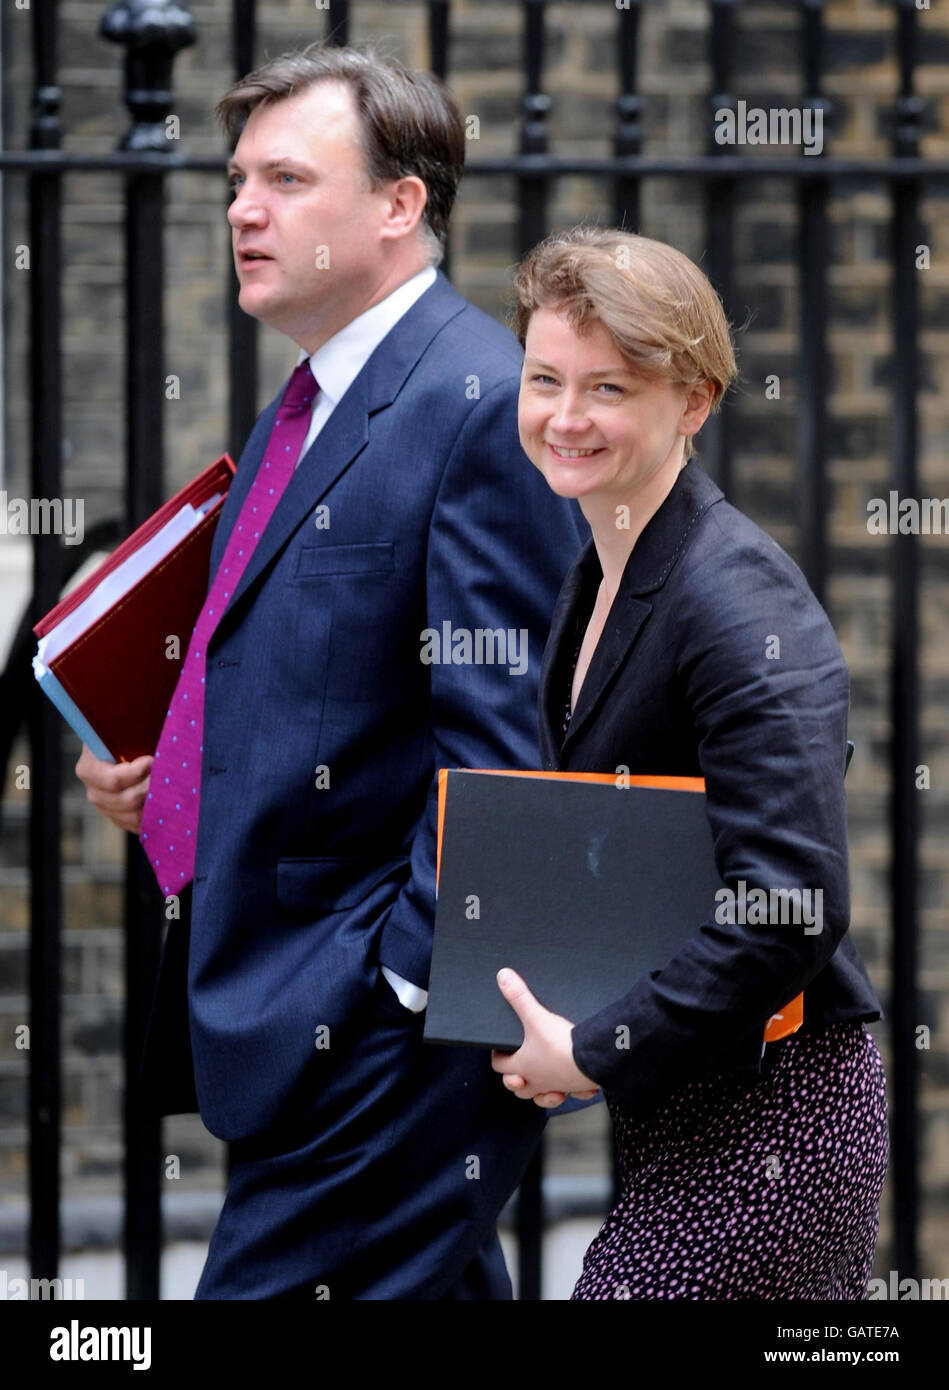 Chief Secretary to the Treasury Yvette Cooper and Minister for Children, Schools and Families Ed Balls arrive for a cabinet meeting at Downing Street. Stock Photo